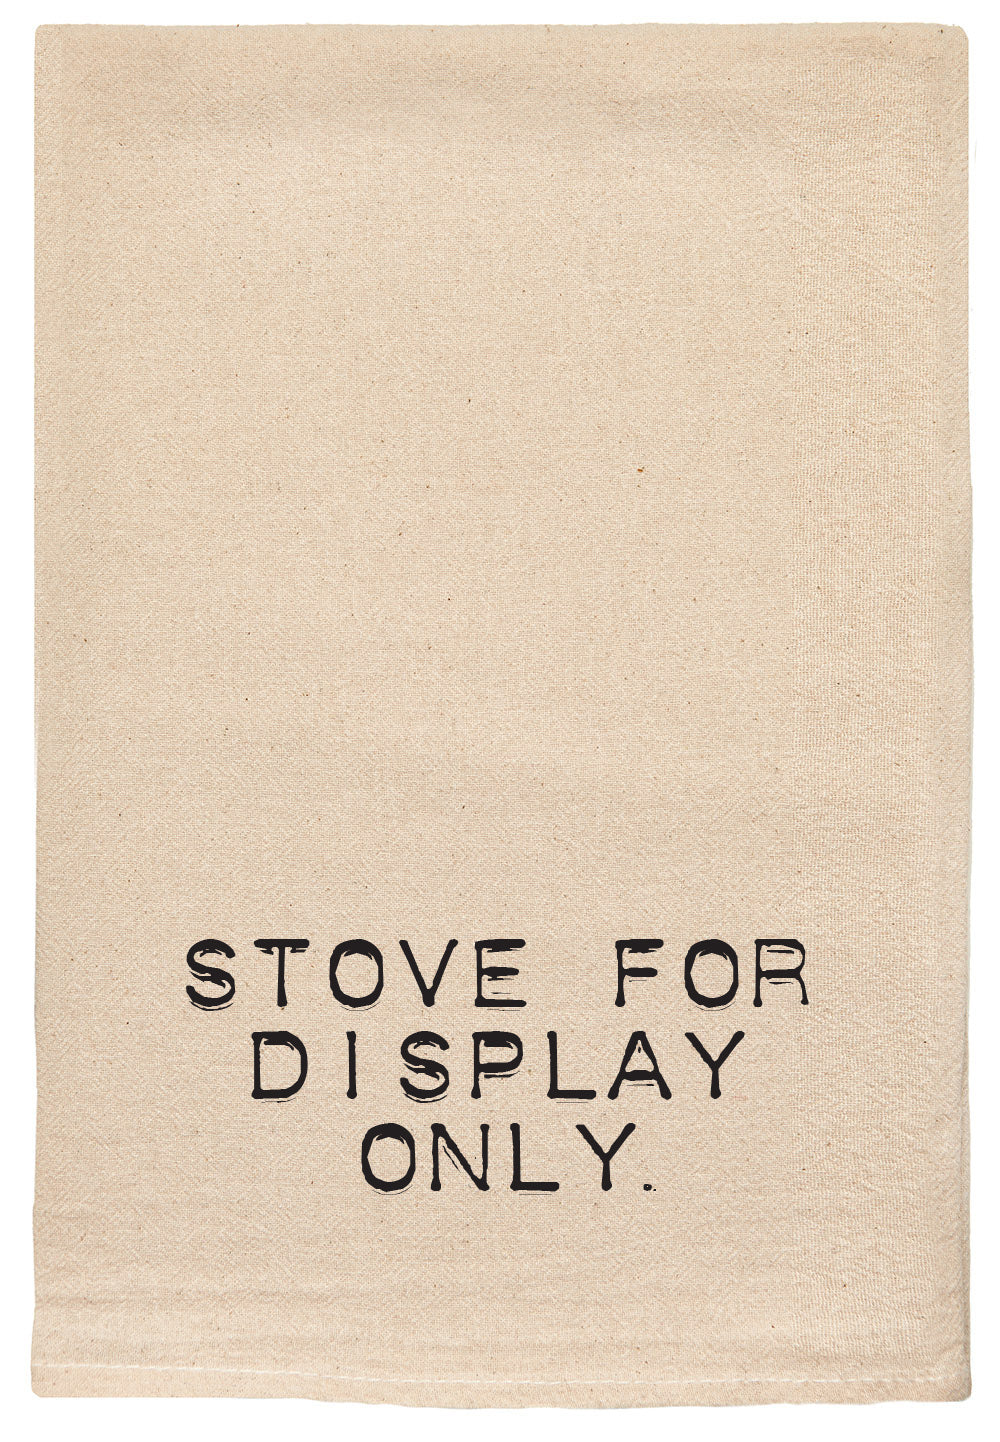 Stove, For Display Only - Tea Towel - Lone Star Art